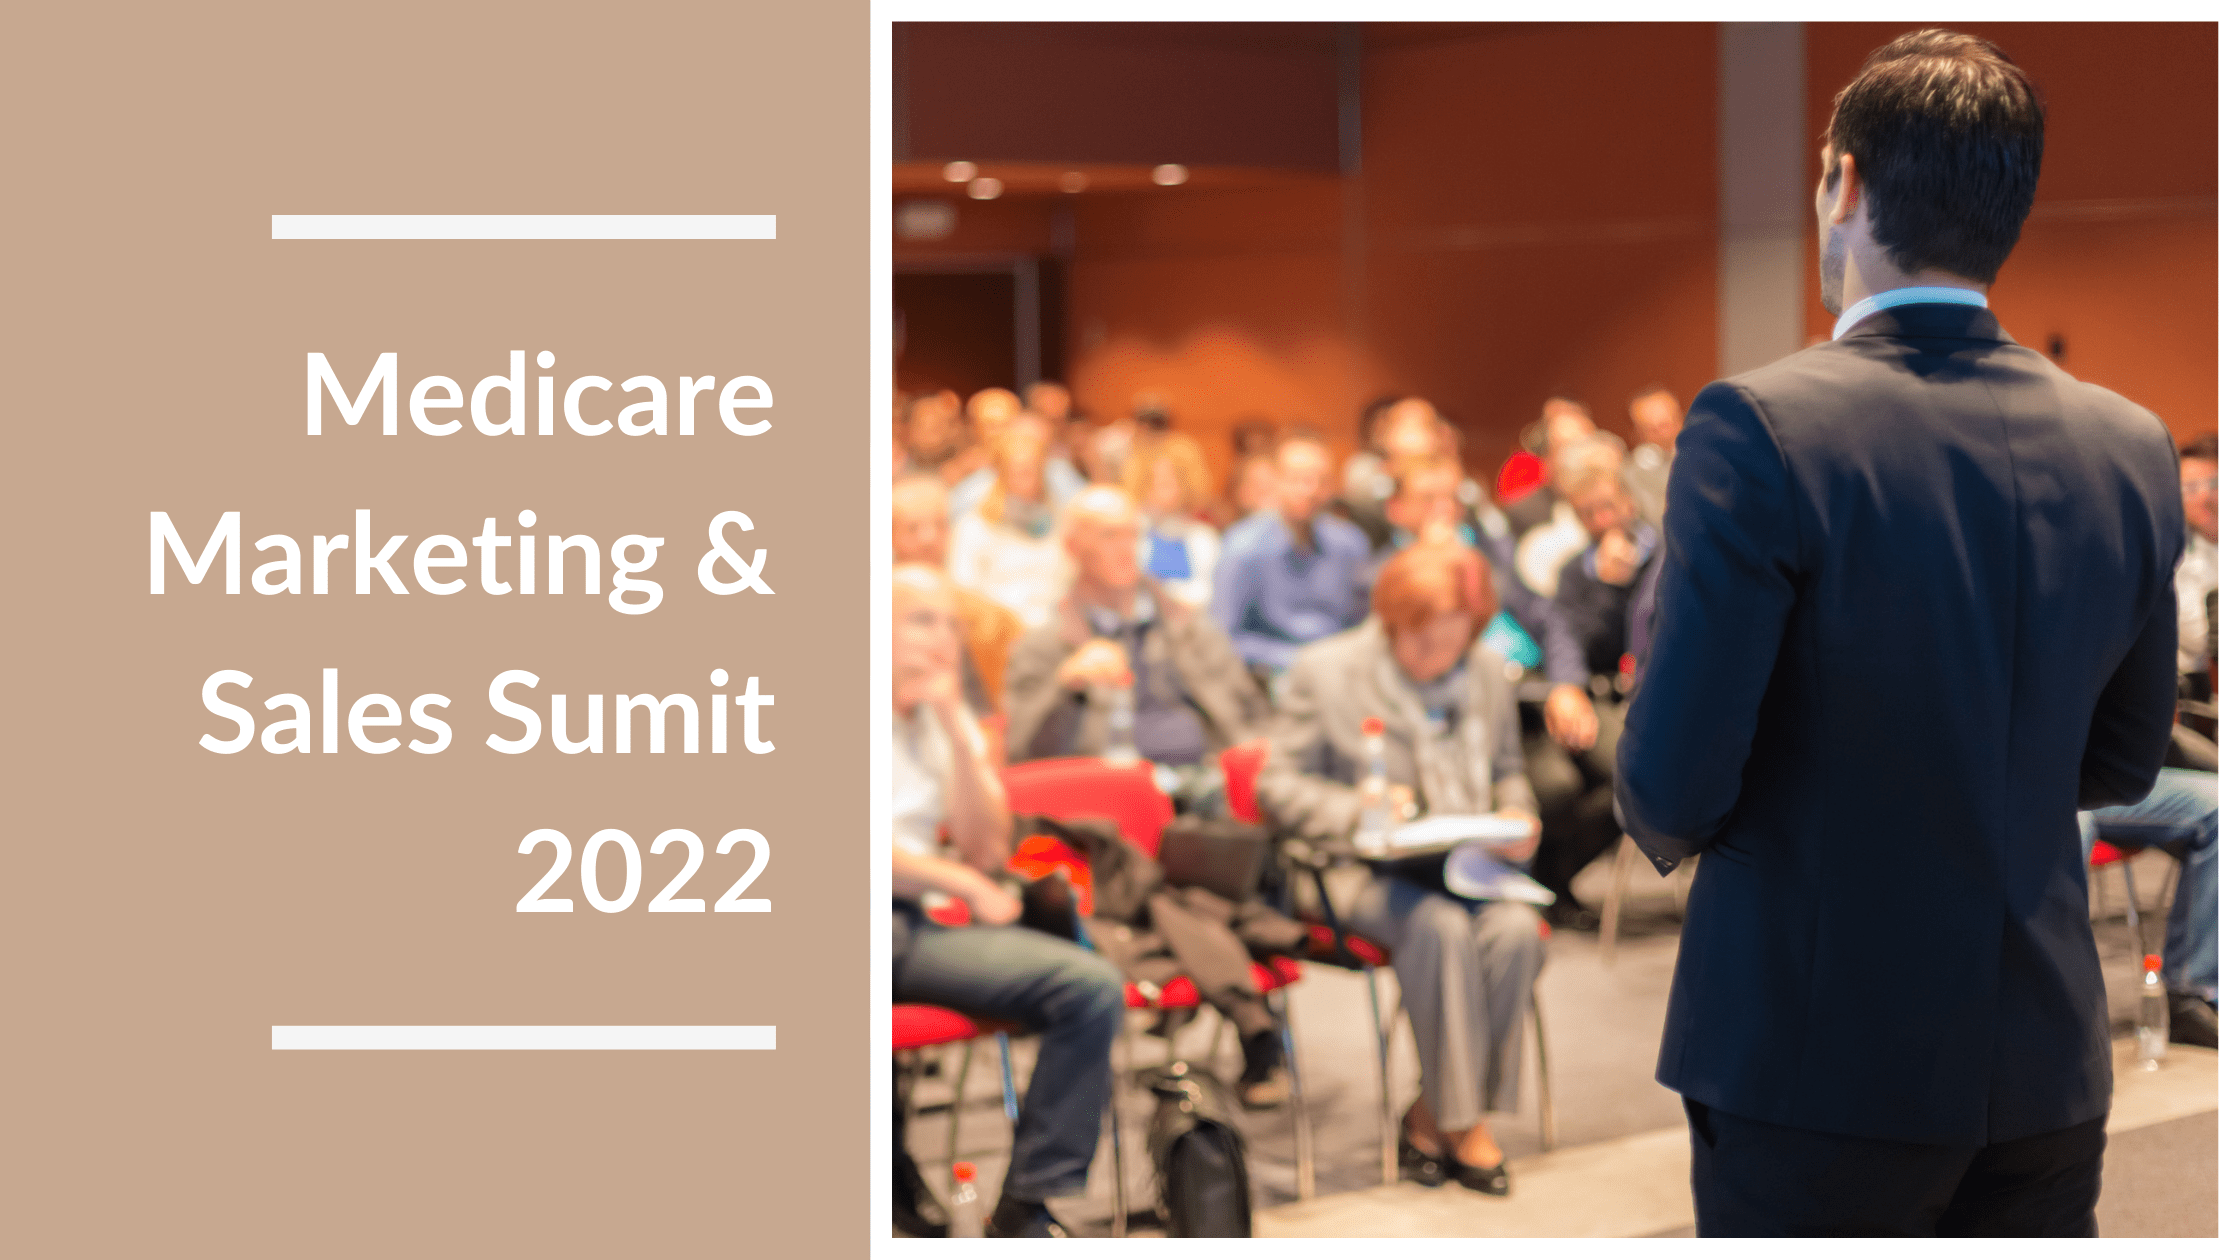 MCG Attends The 2022 RISE Medicare Marketing & Sales Summit Featured Image